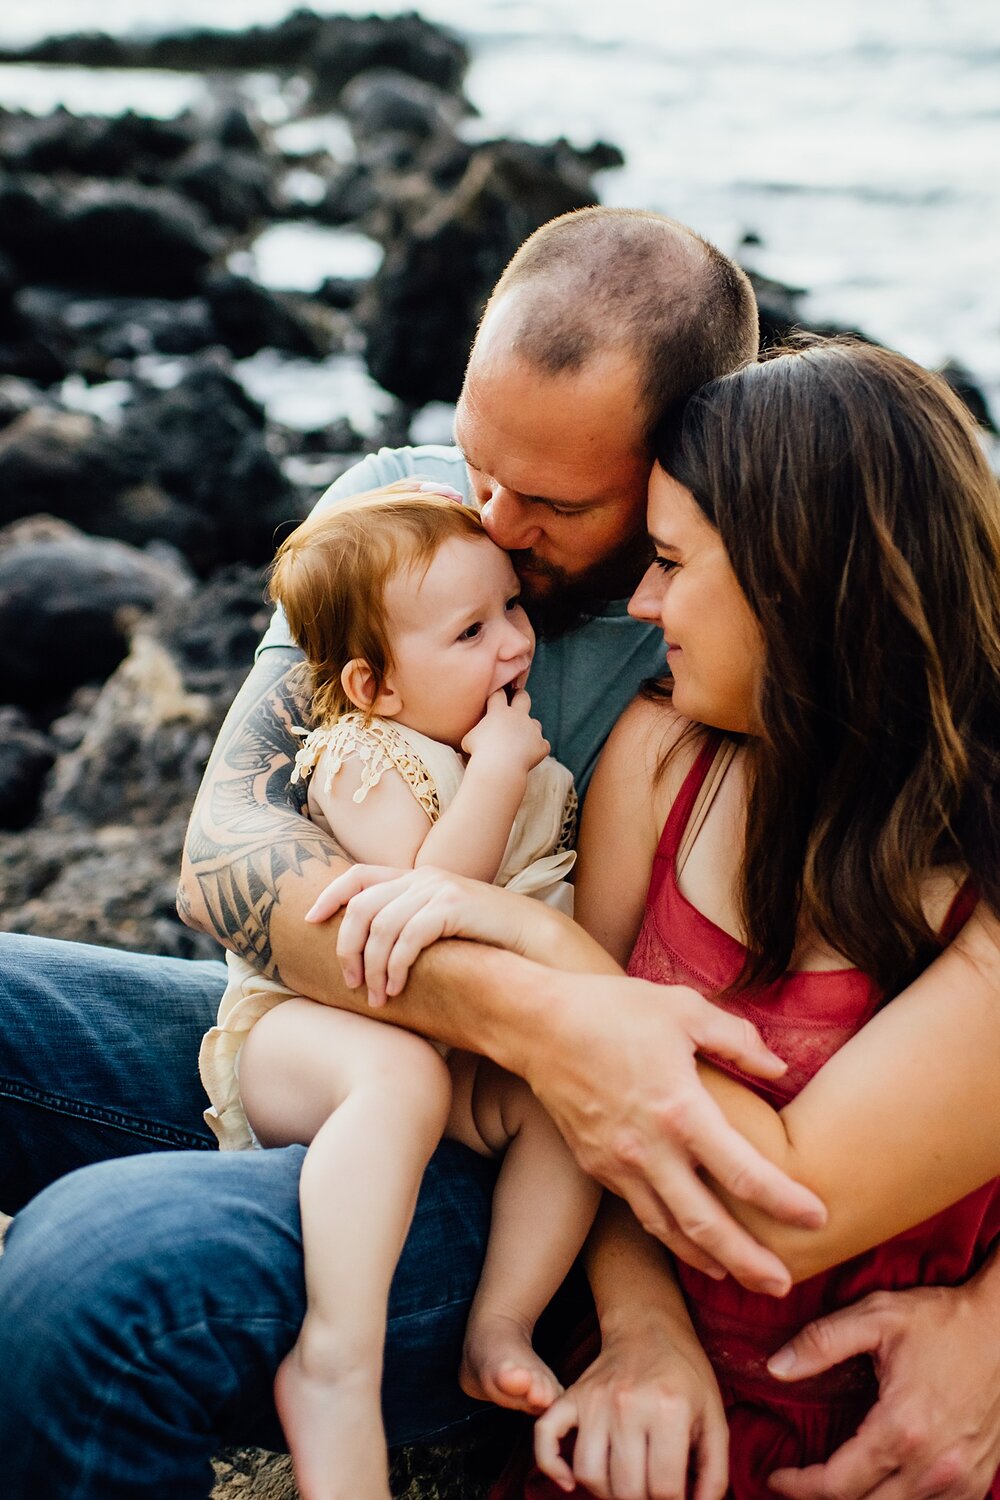 sweet and intimate moments of the family by Hawaii photographer